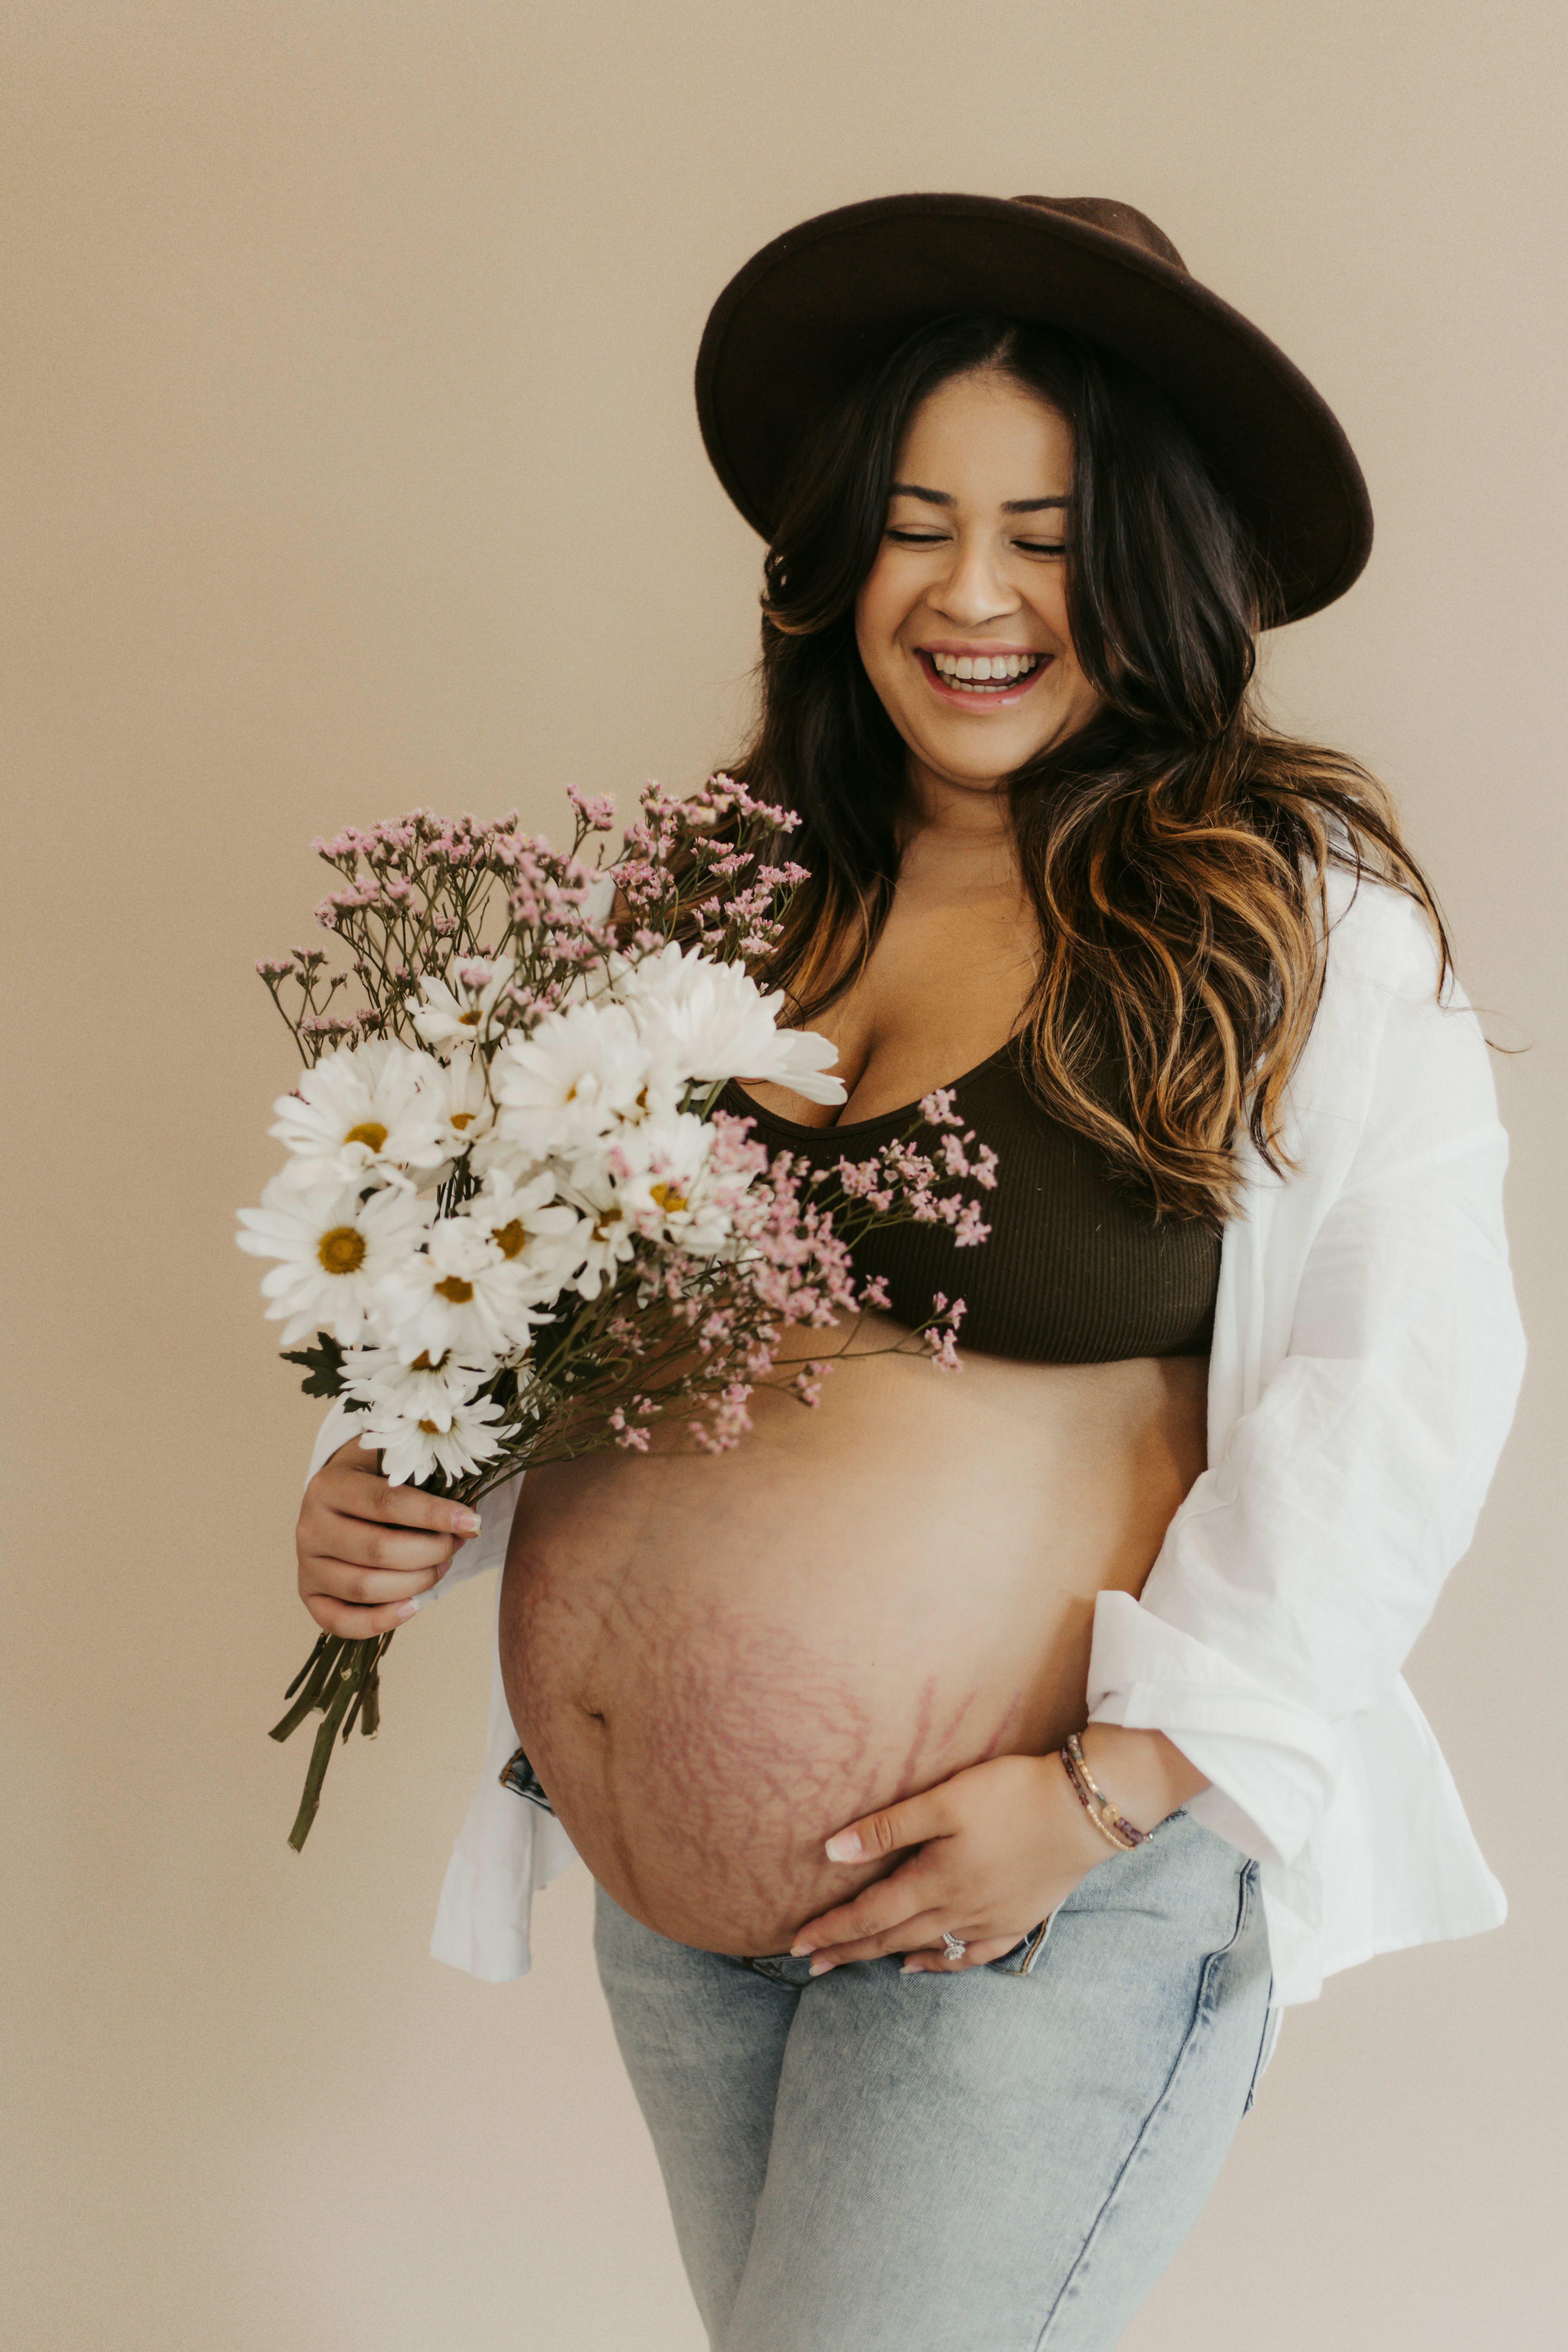 A country-themed maternity photoshoot featuring a pregnant woman holding a bouquet of flowers.